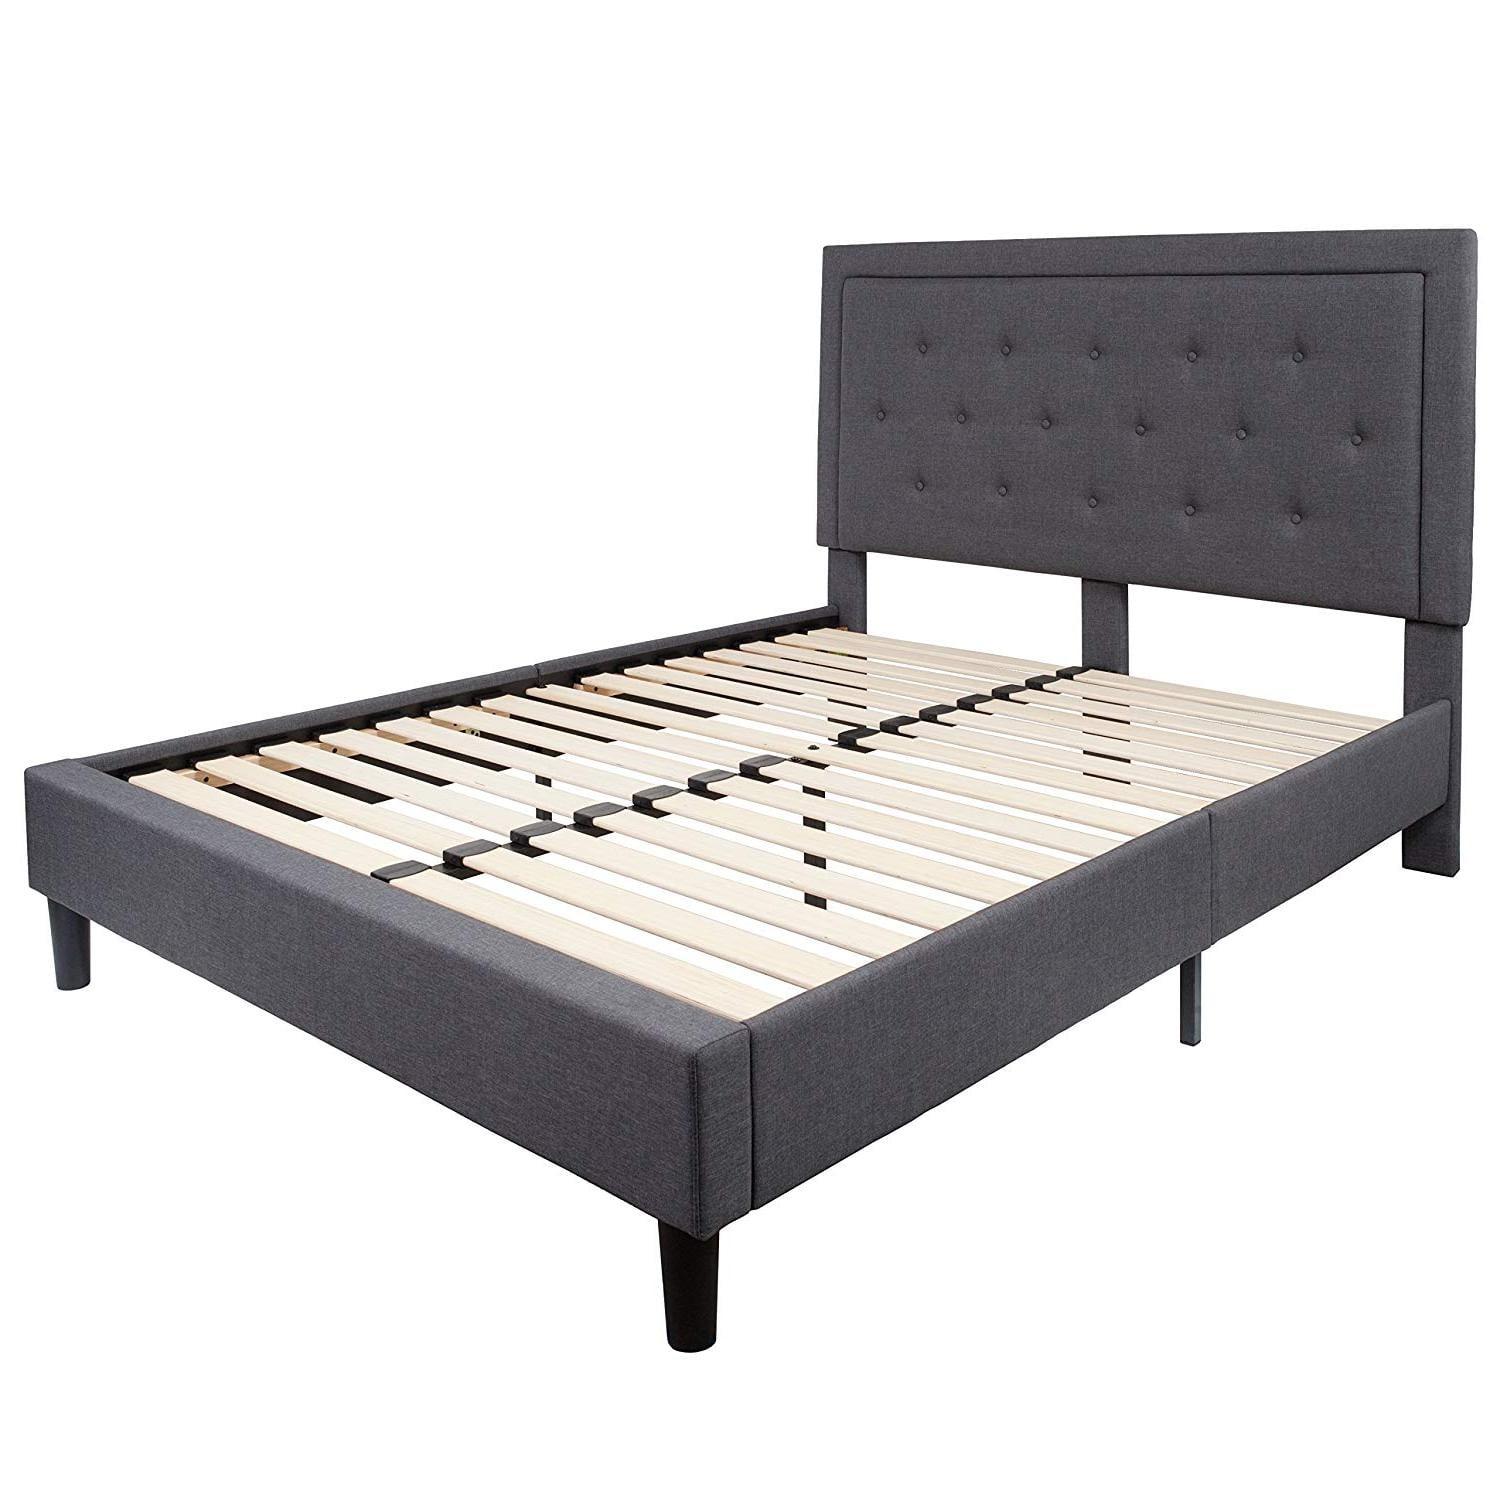 Modern Queen-Sized Upholstered Platform Bed with Tufted Headboard in Dark Gray